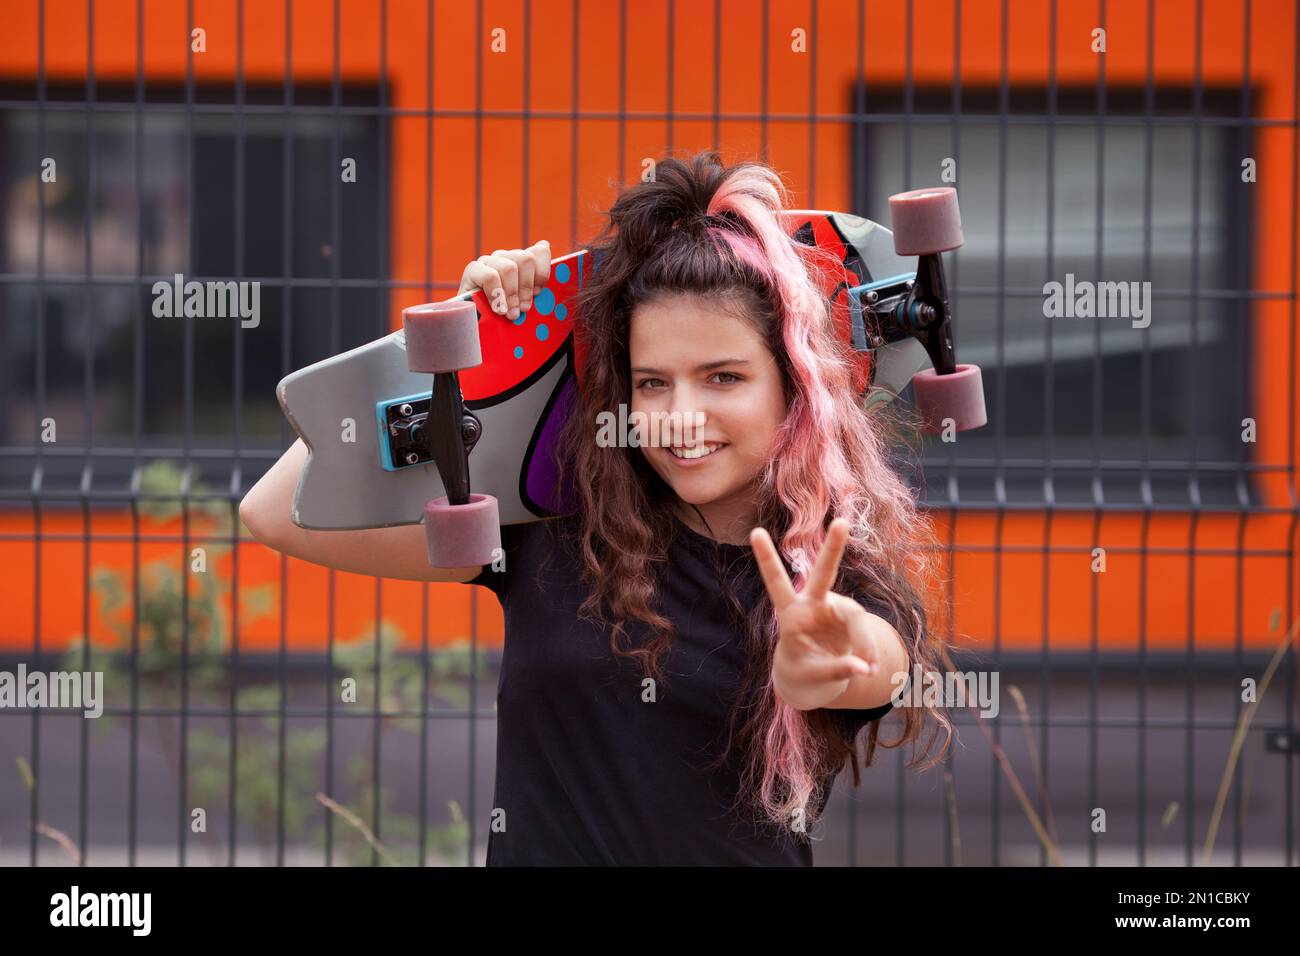 Colorful portrait happy young girl with skateboard smiling, looking at camera and showing peace or victory gesture Stock Photo